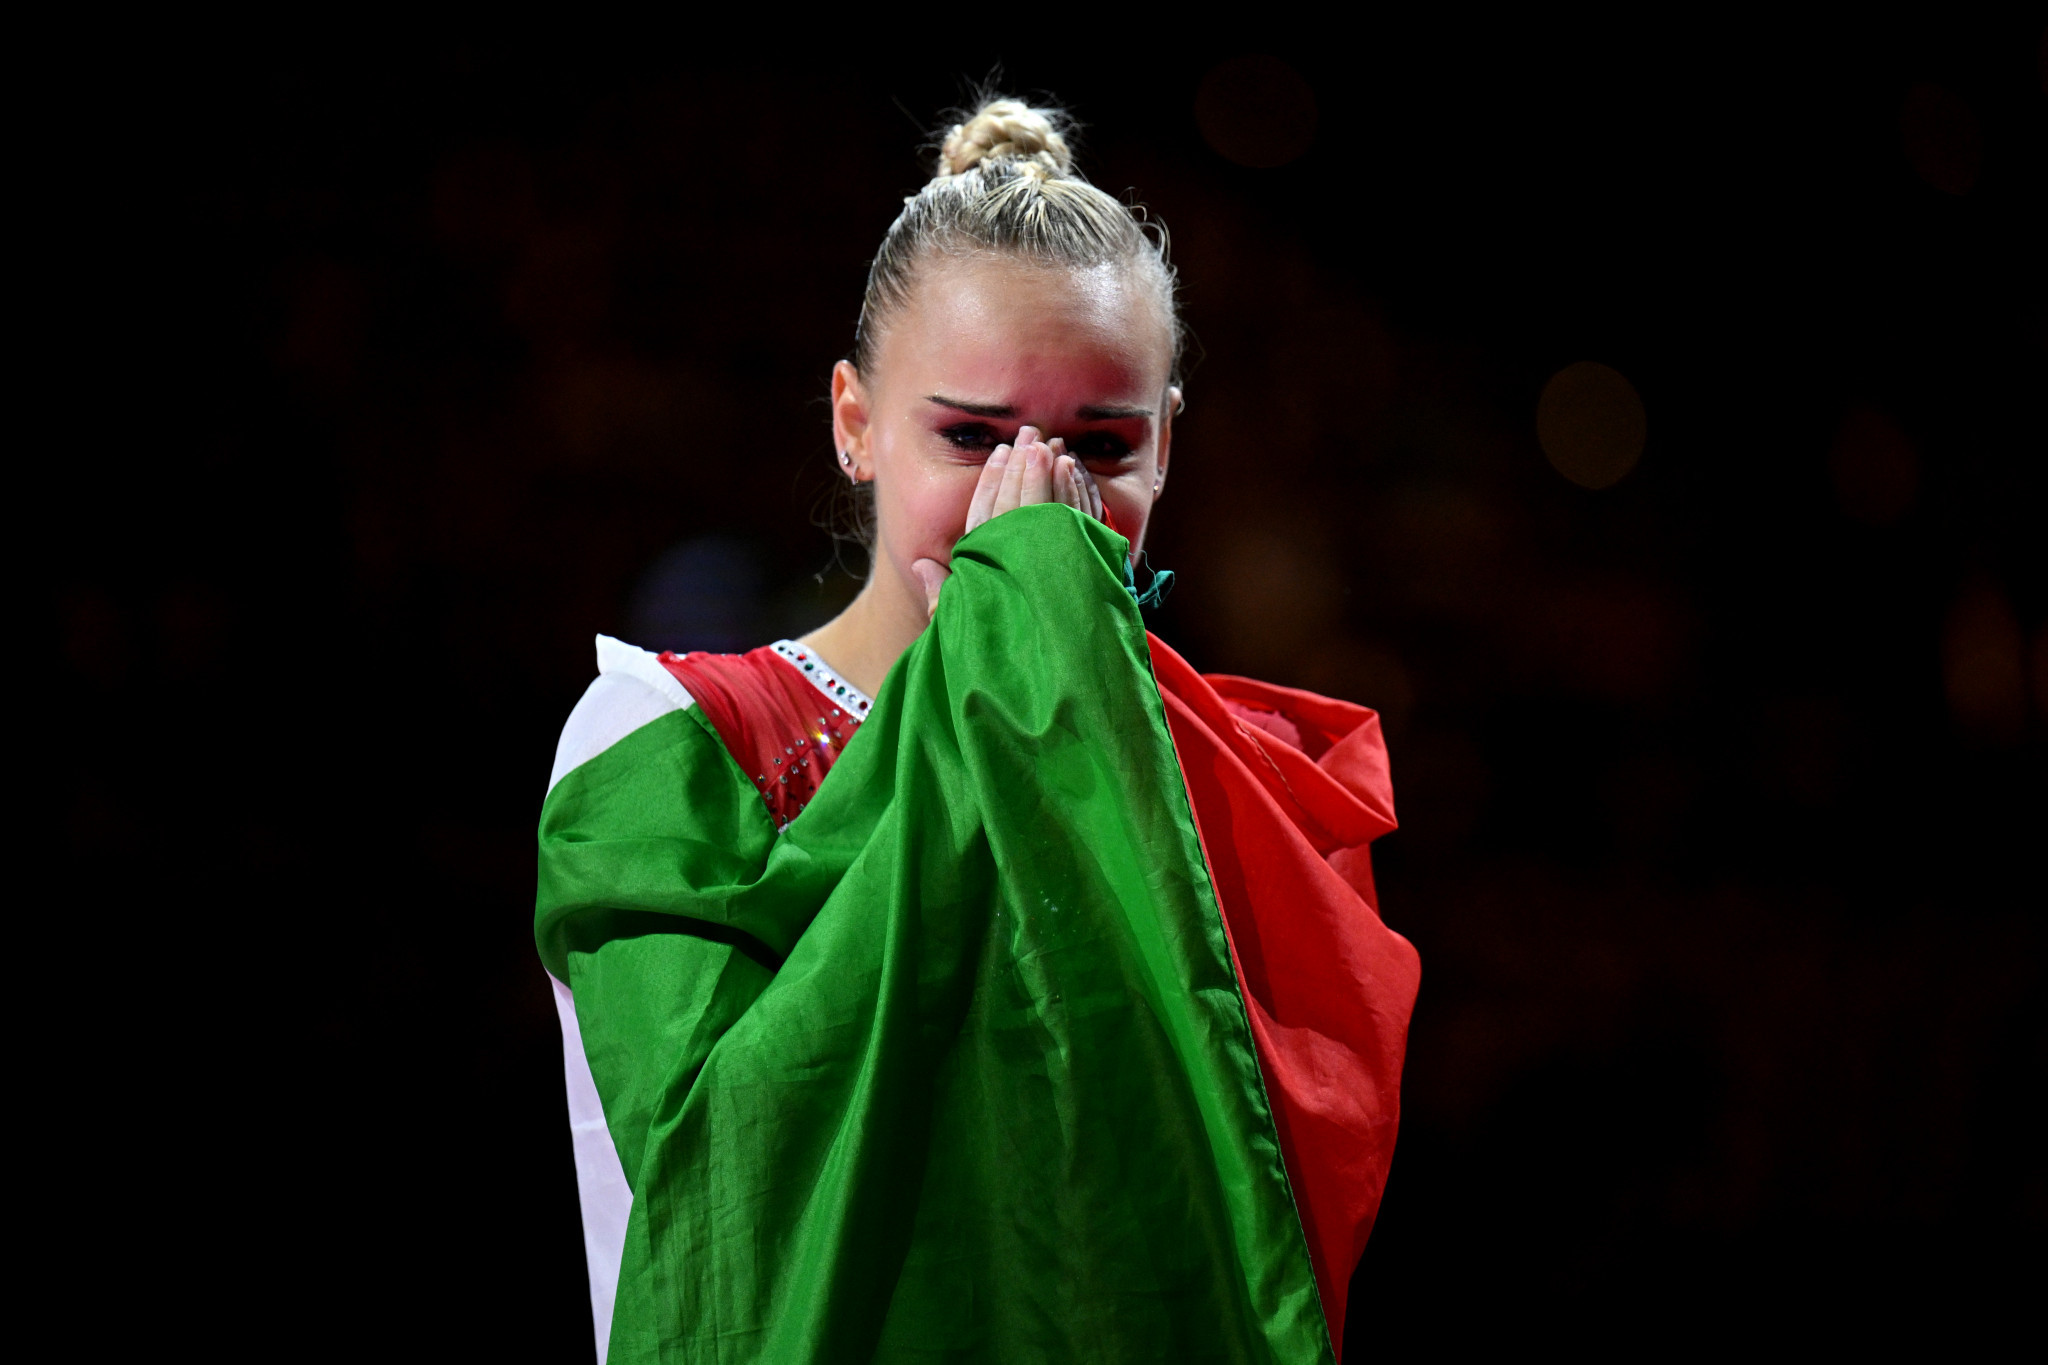 Italy’s Asia D’Amato earned the first gold medal of the Munich 2022 European Championships by winning the artistic gymnastics women’s all-around title ©Getty Images